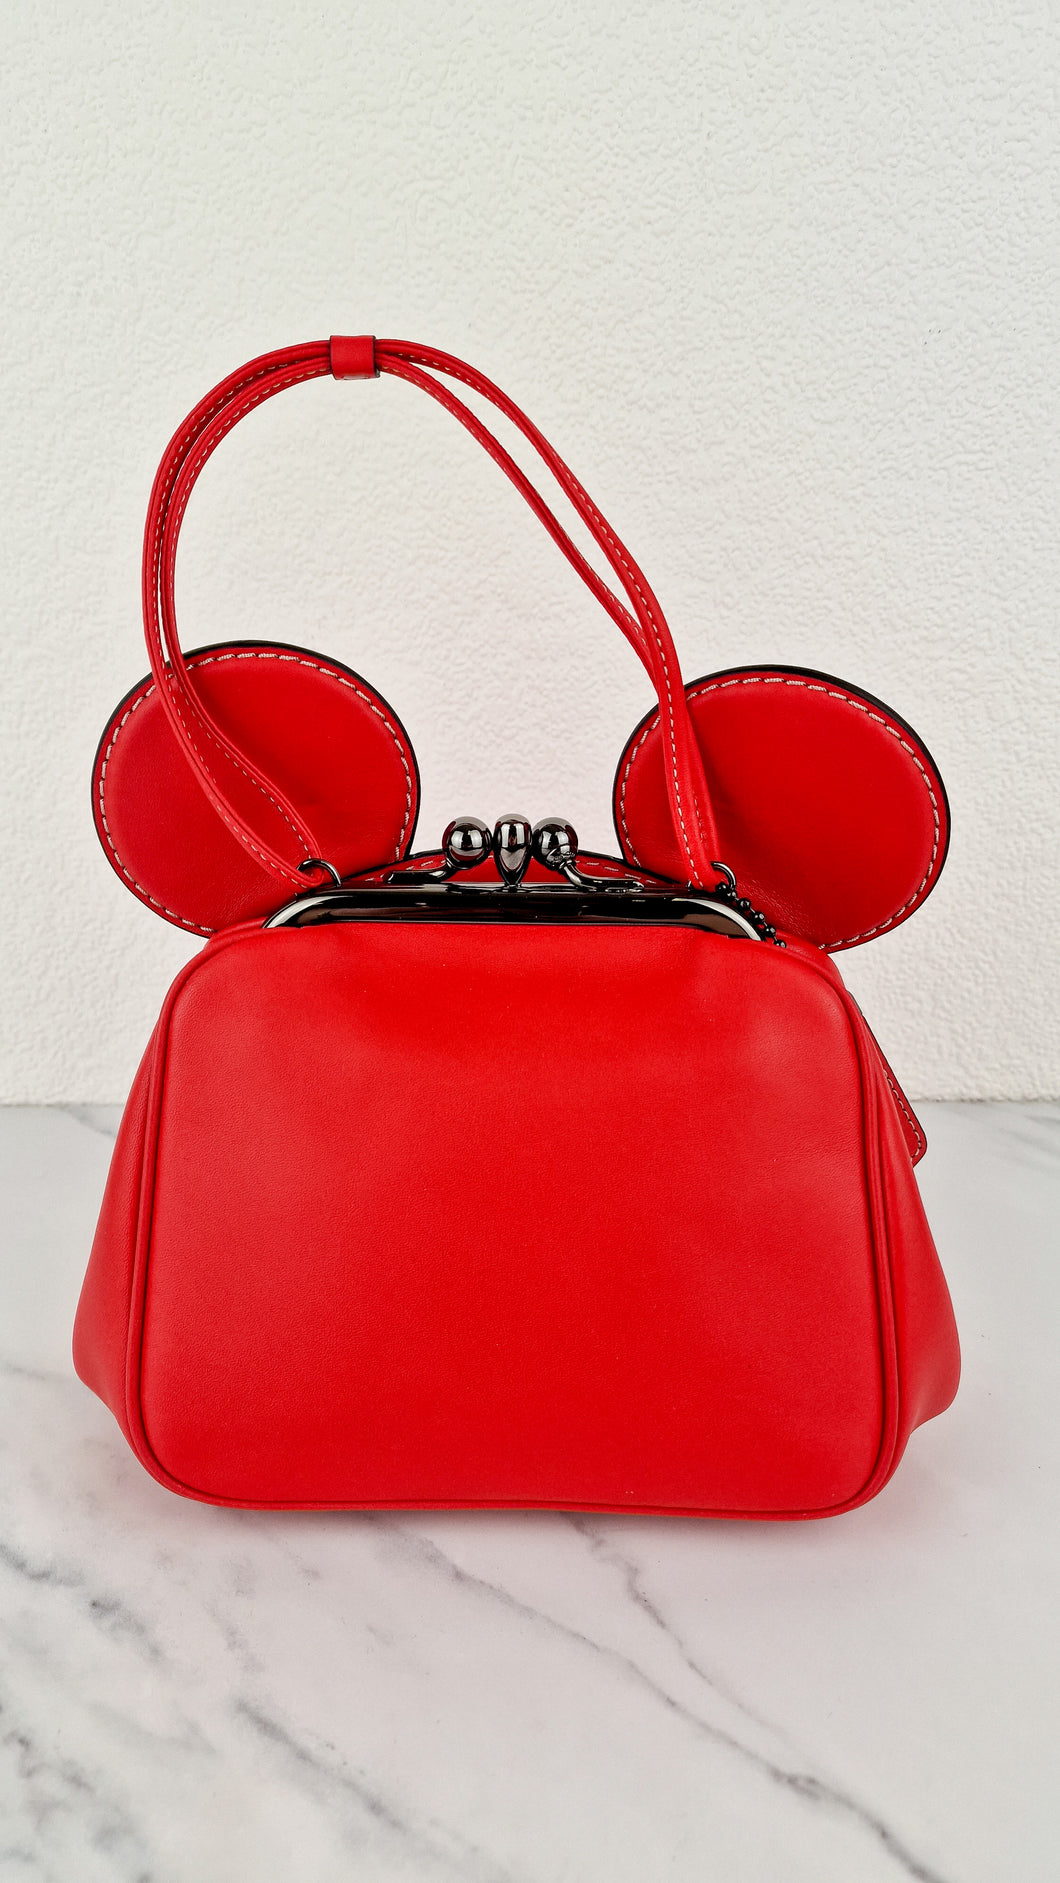 Coach x Disney x Keith Haring Mickey Mouse Ears Bag in Red Smooth Leather With Kisslock & Chain Strap LIMITED EDITION - Handbag Coach 37980